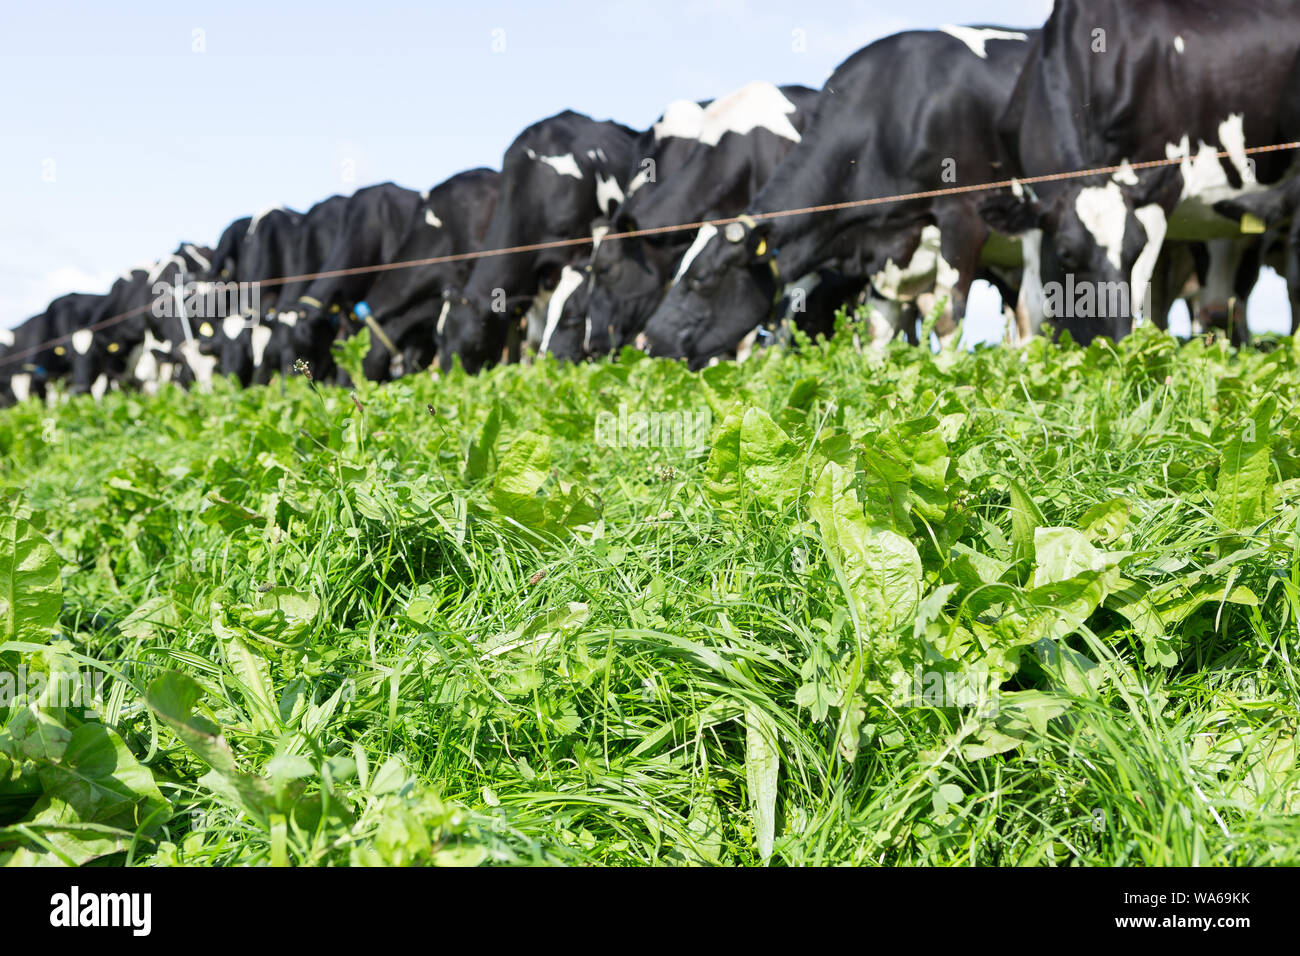 dairy cows grazing in uk Stock Photo